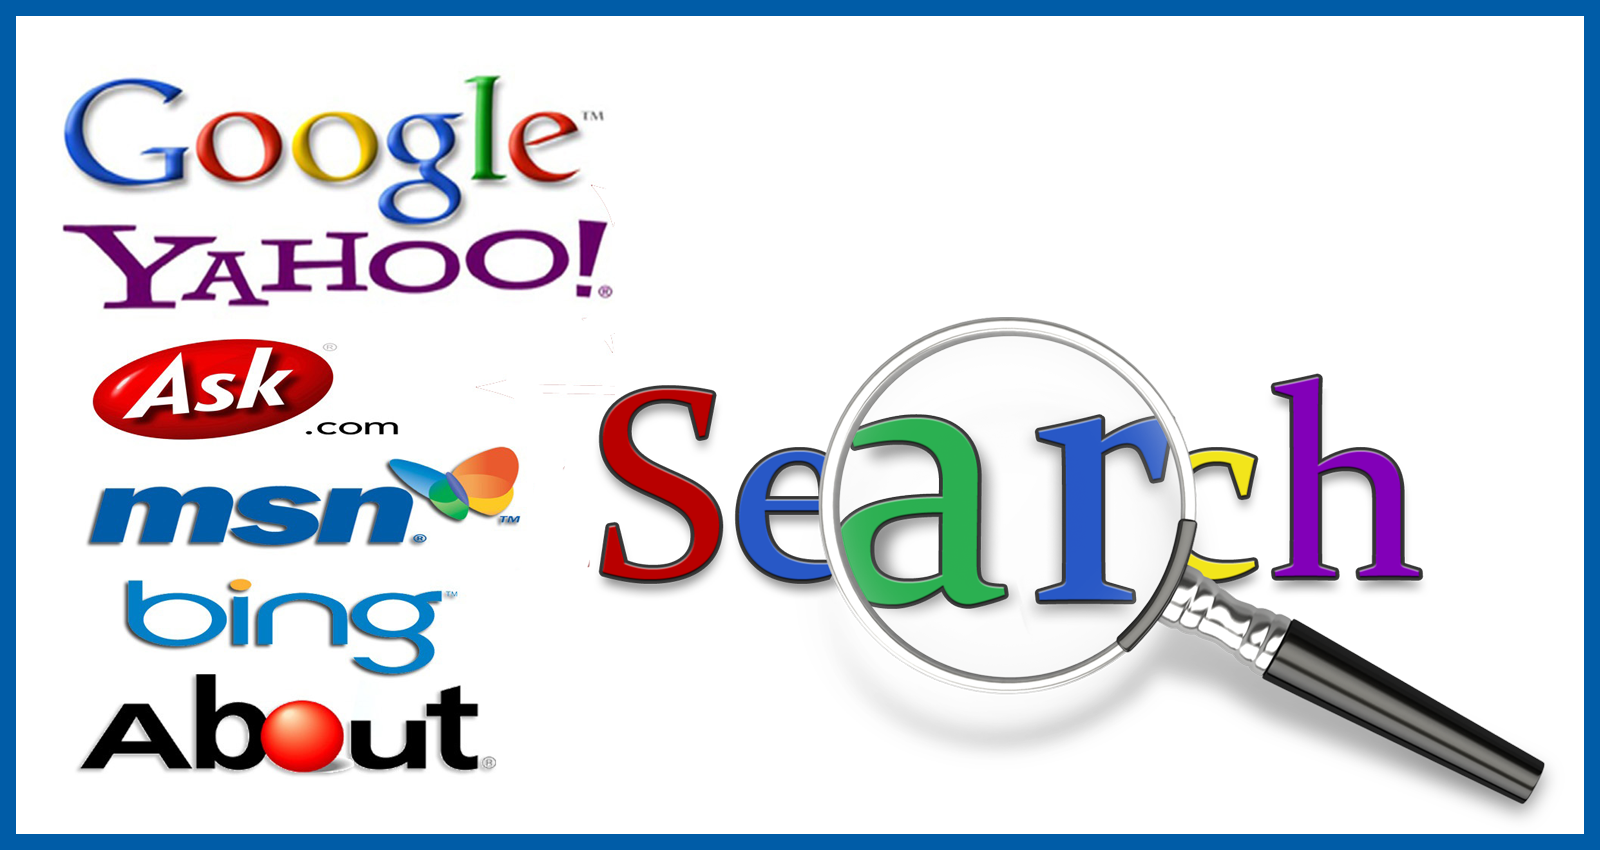 Focusing on Search Engines Over People